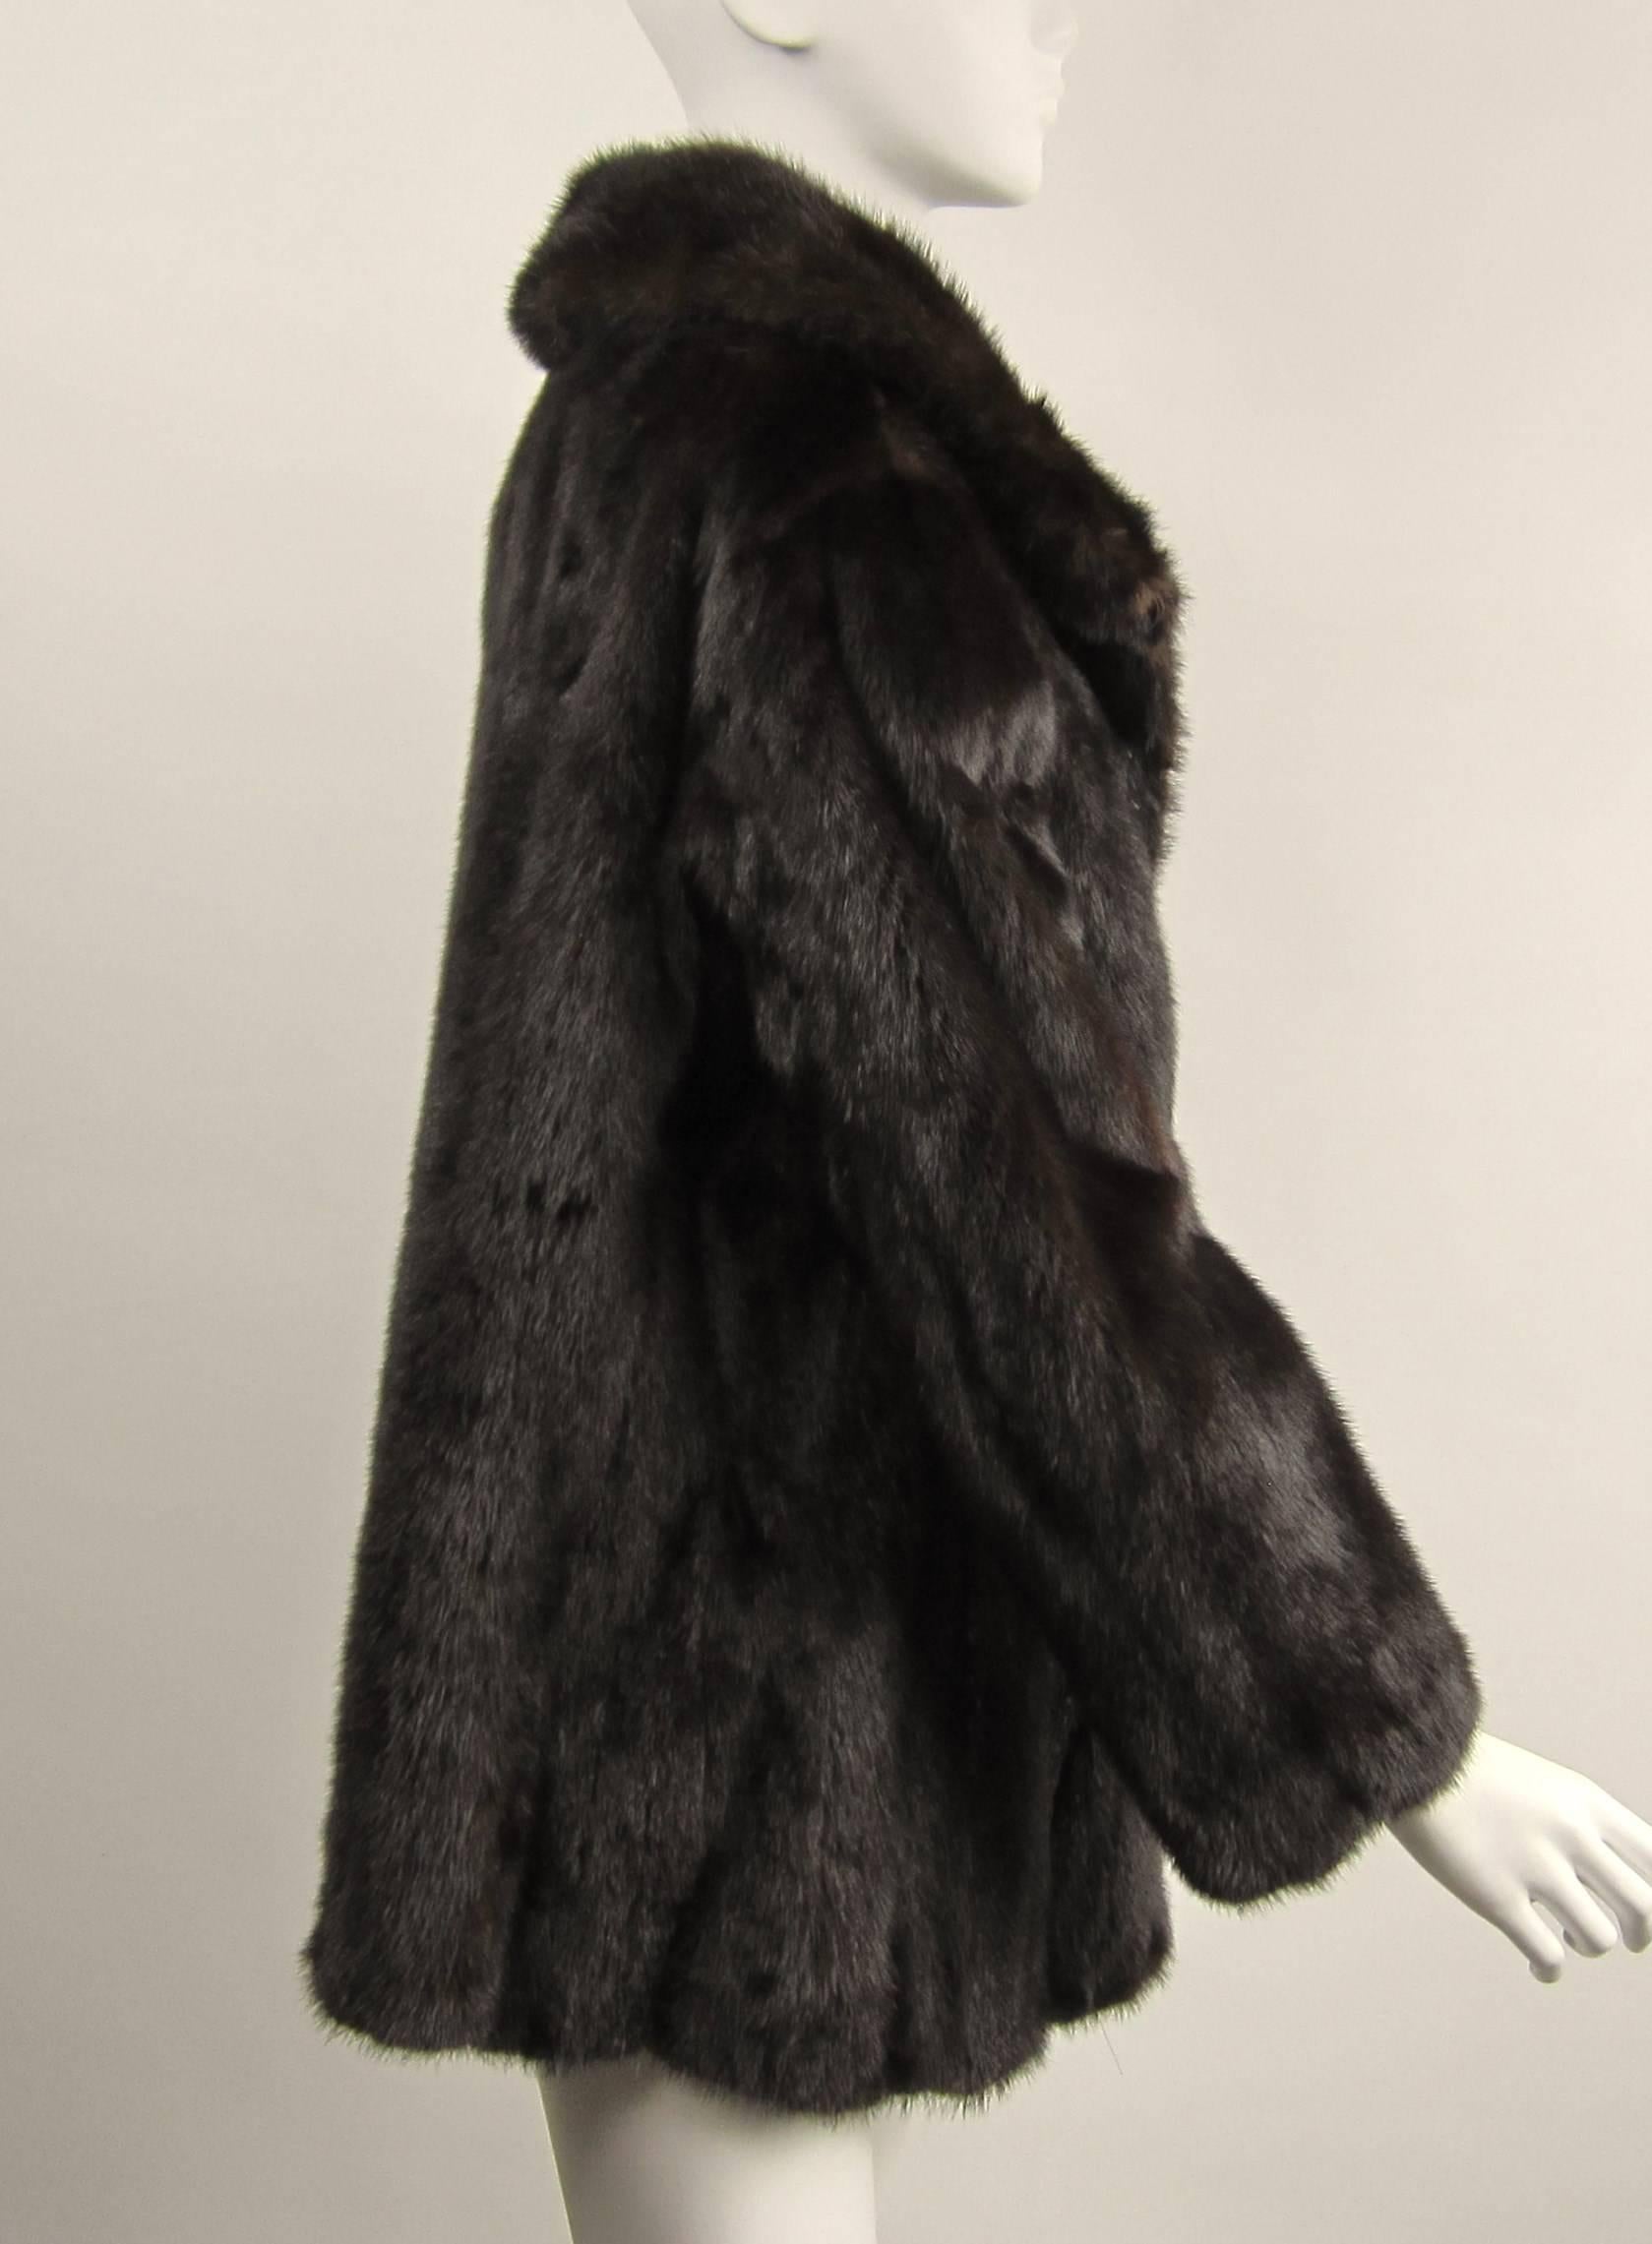 Ranch Mink Fur Coat and Jacket Large w/ Zippered Bottom 2 In 1 For Sale ...